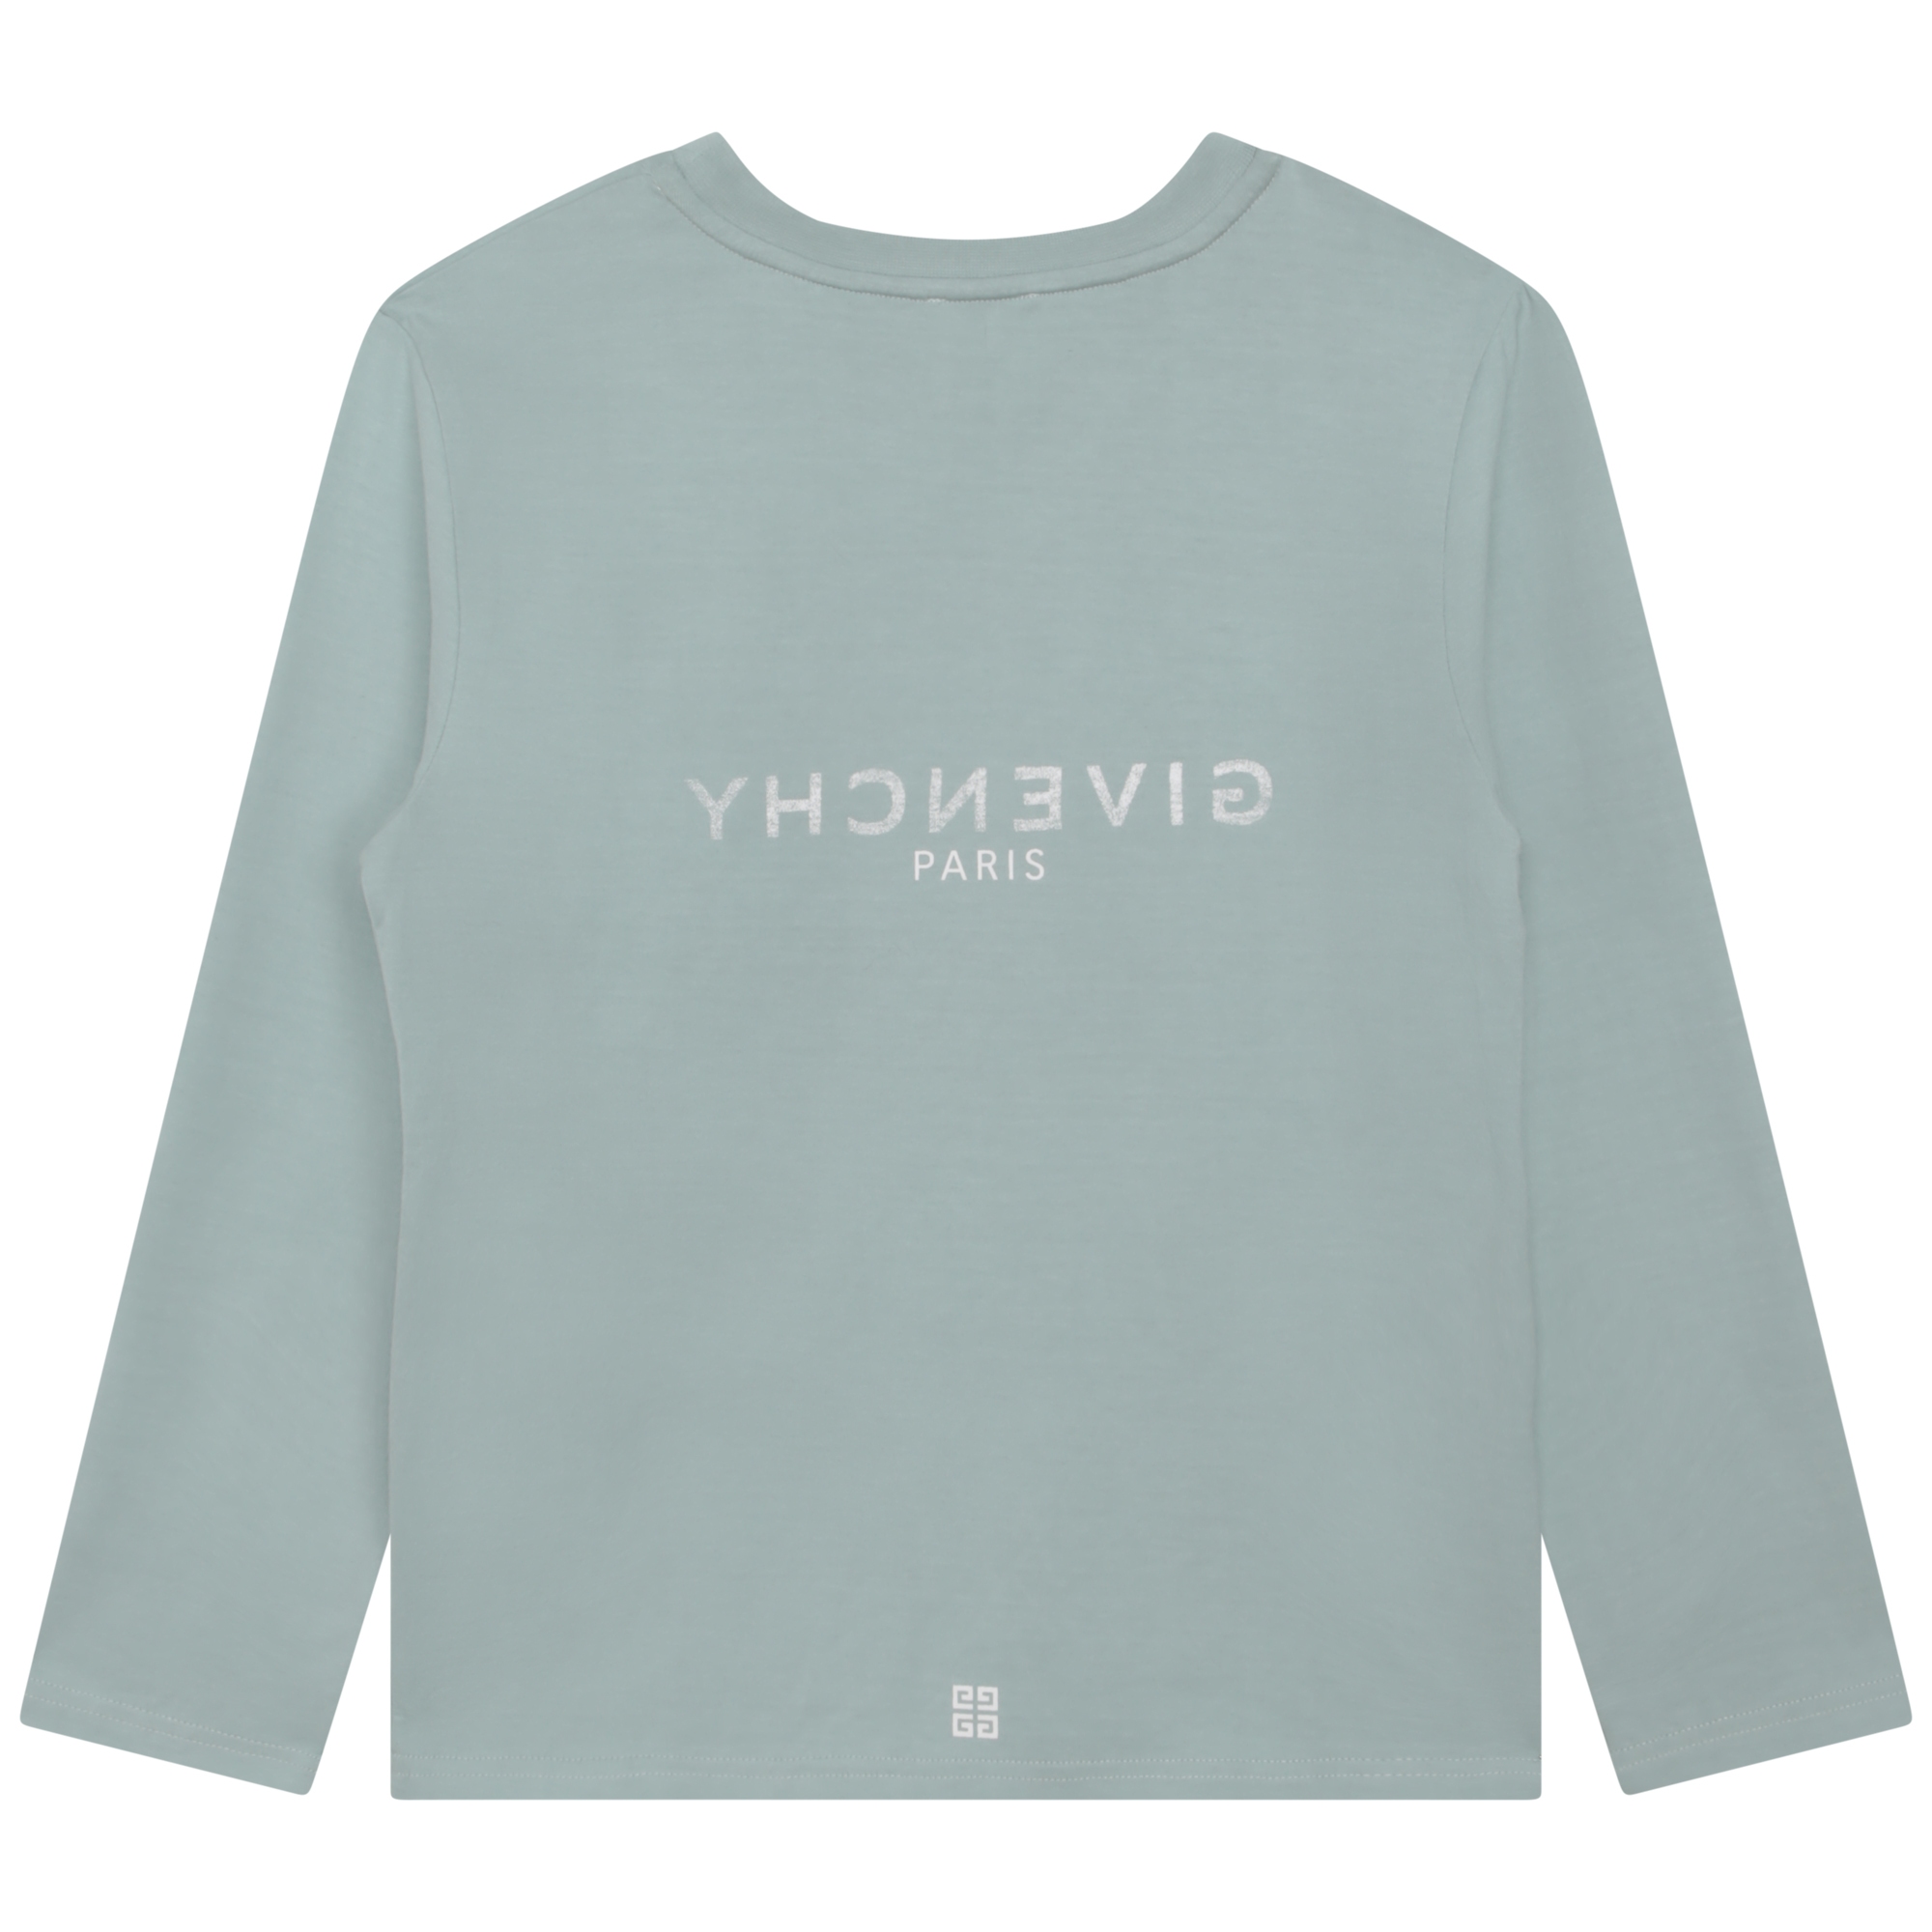 Long-sleeved cotton T-shirt GIVENCHY for BOY